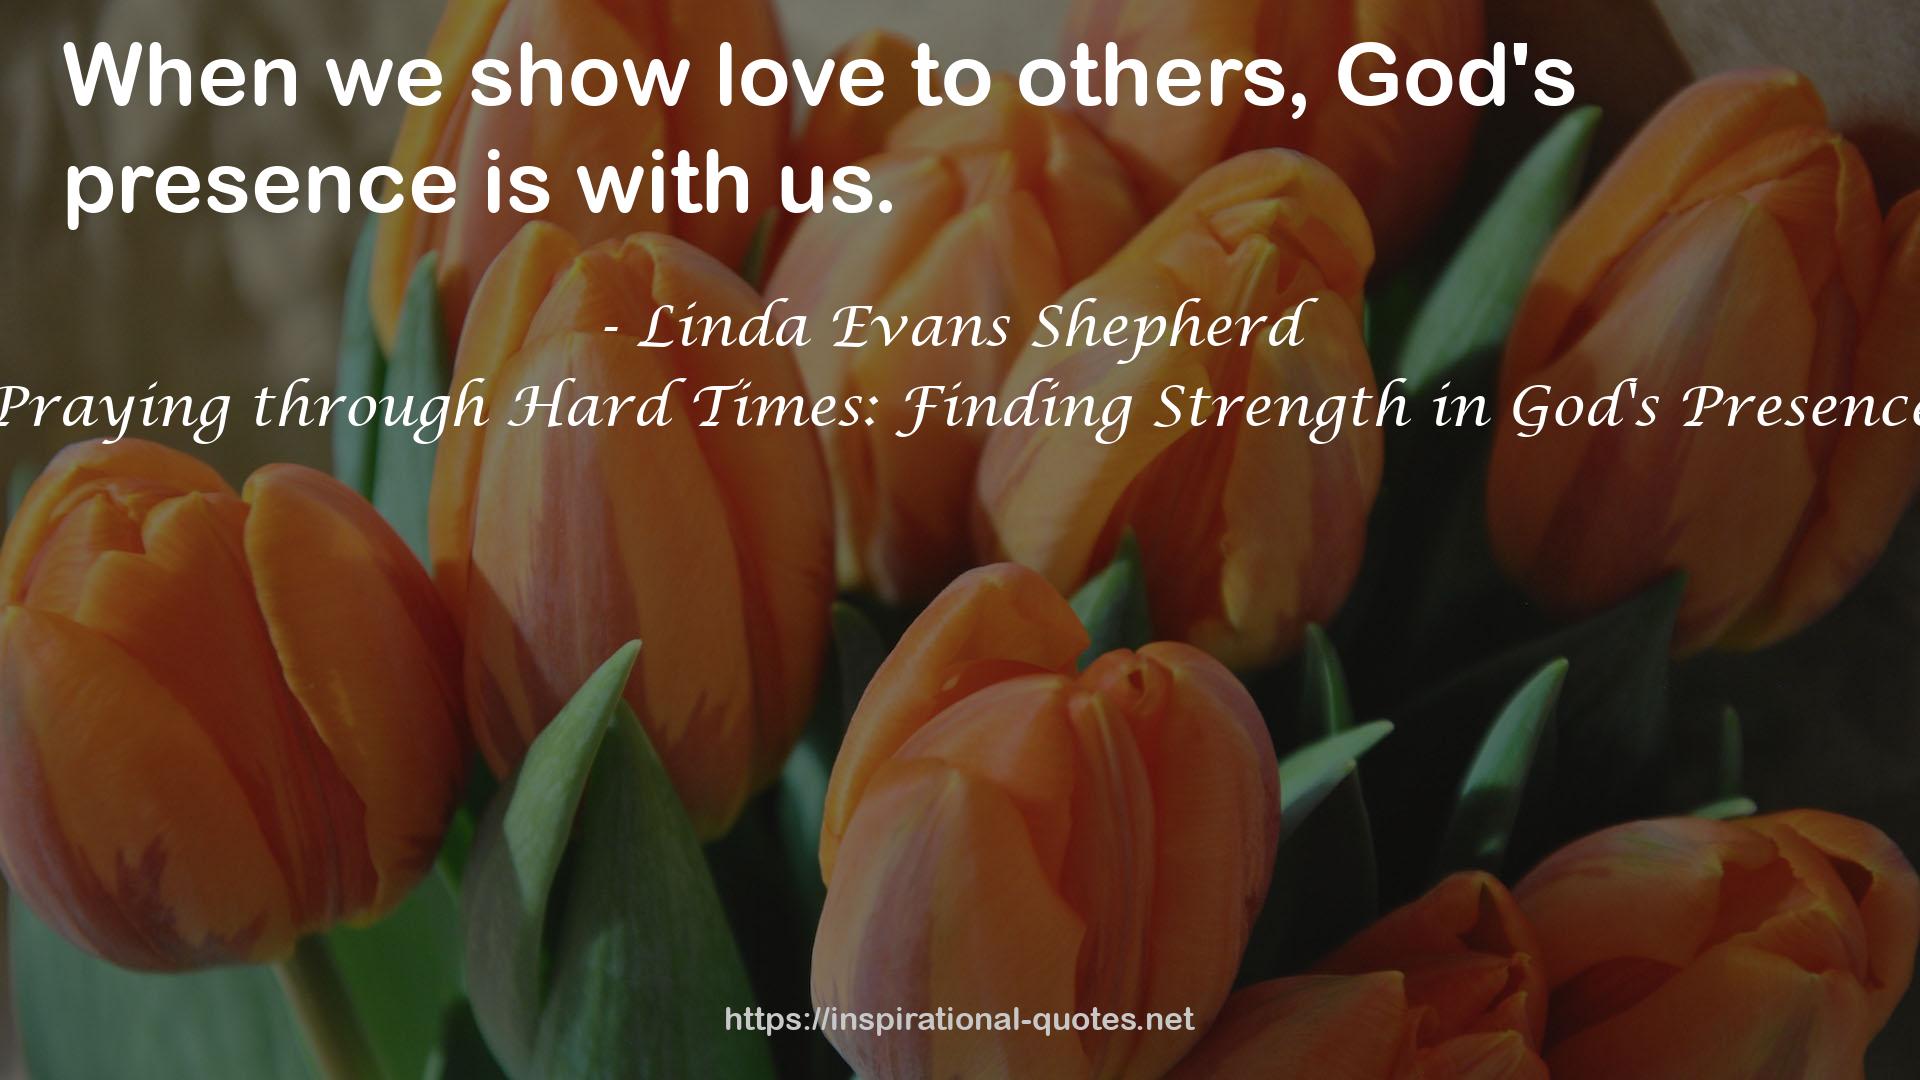 Praying through Hard Times: Finding Strength in God's Presence QUOTES